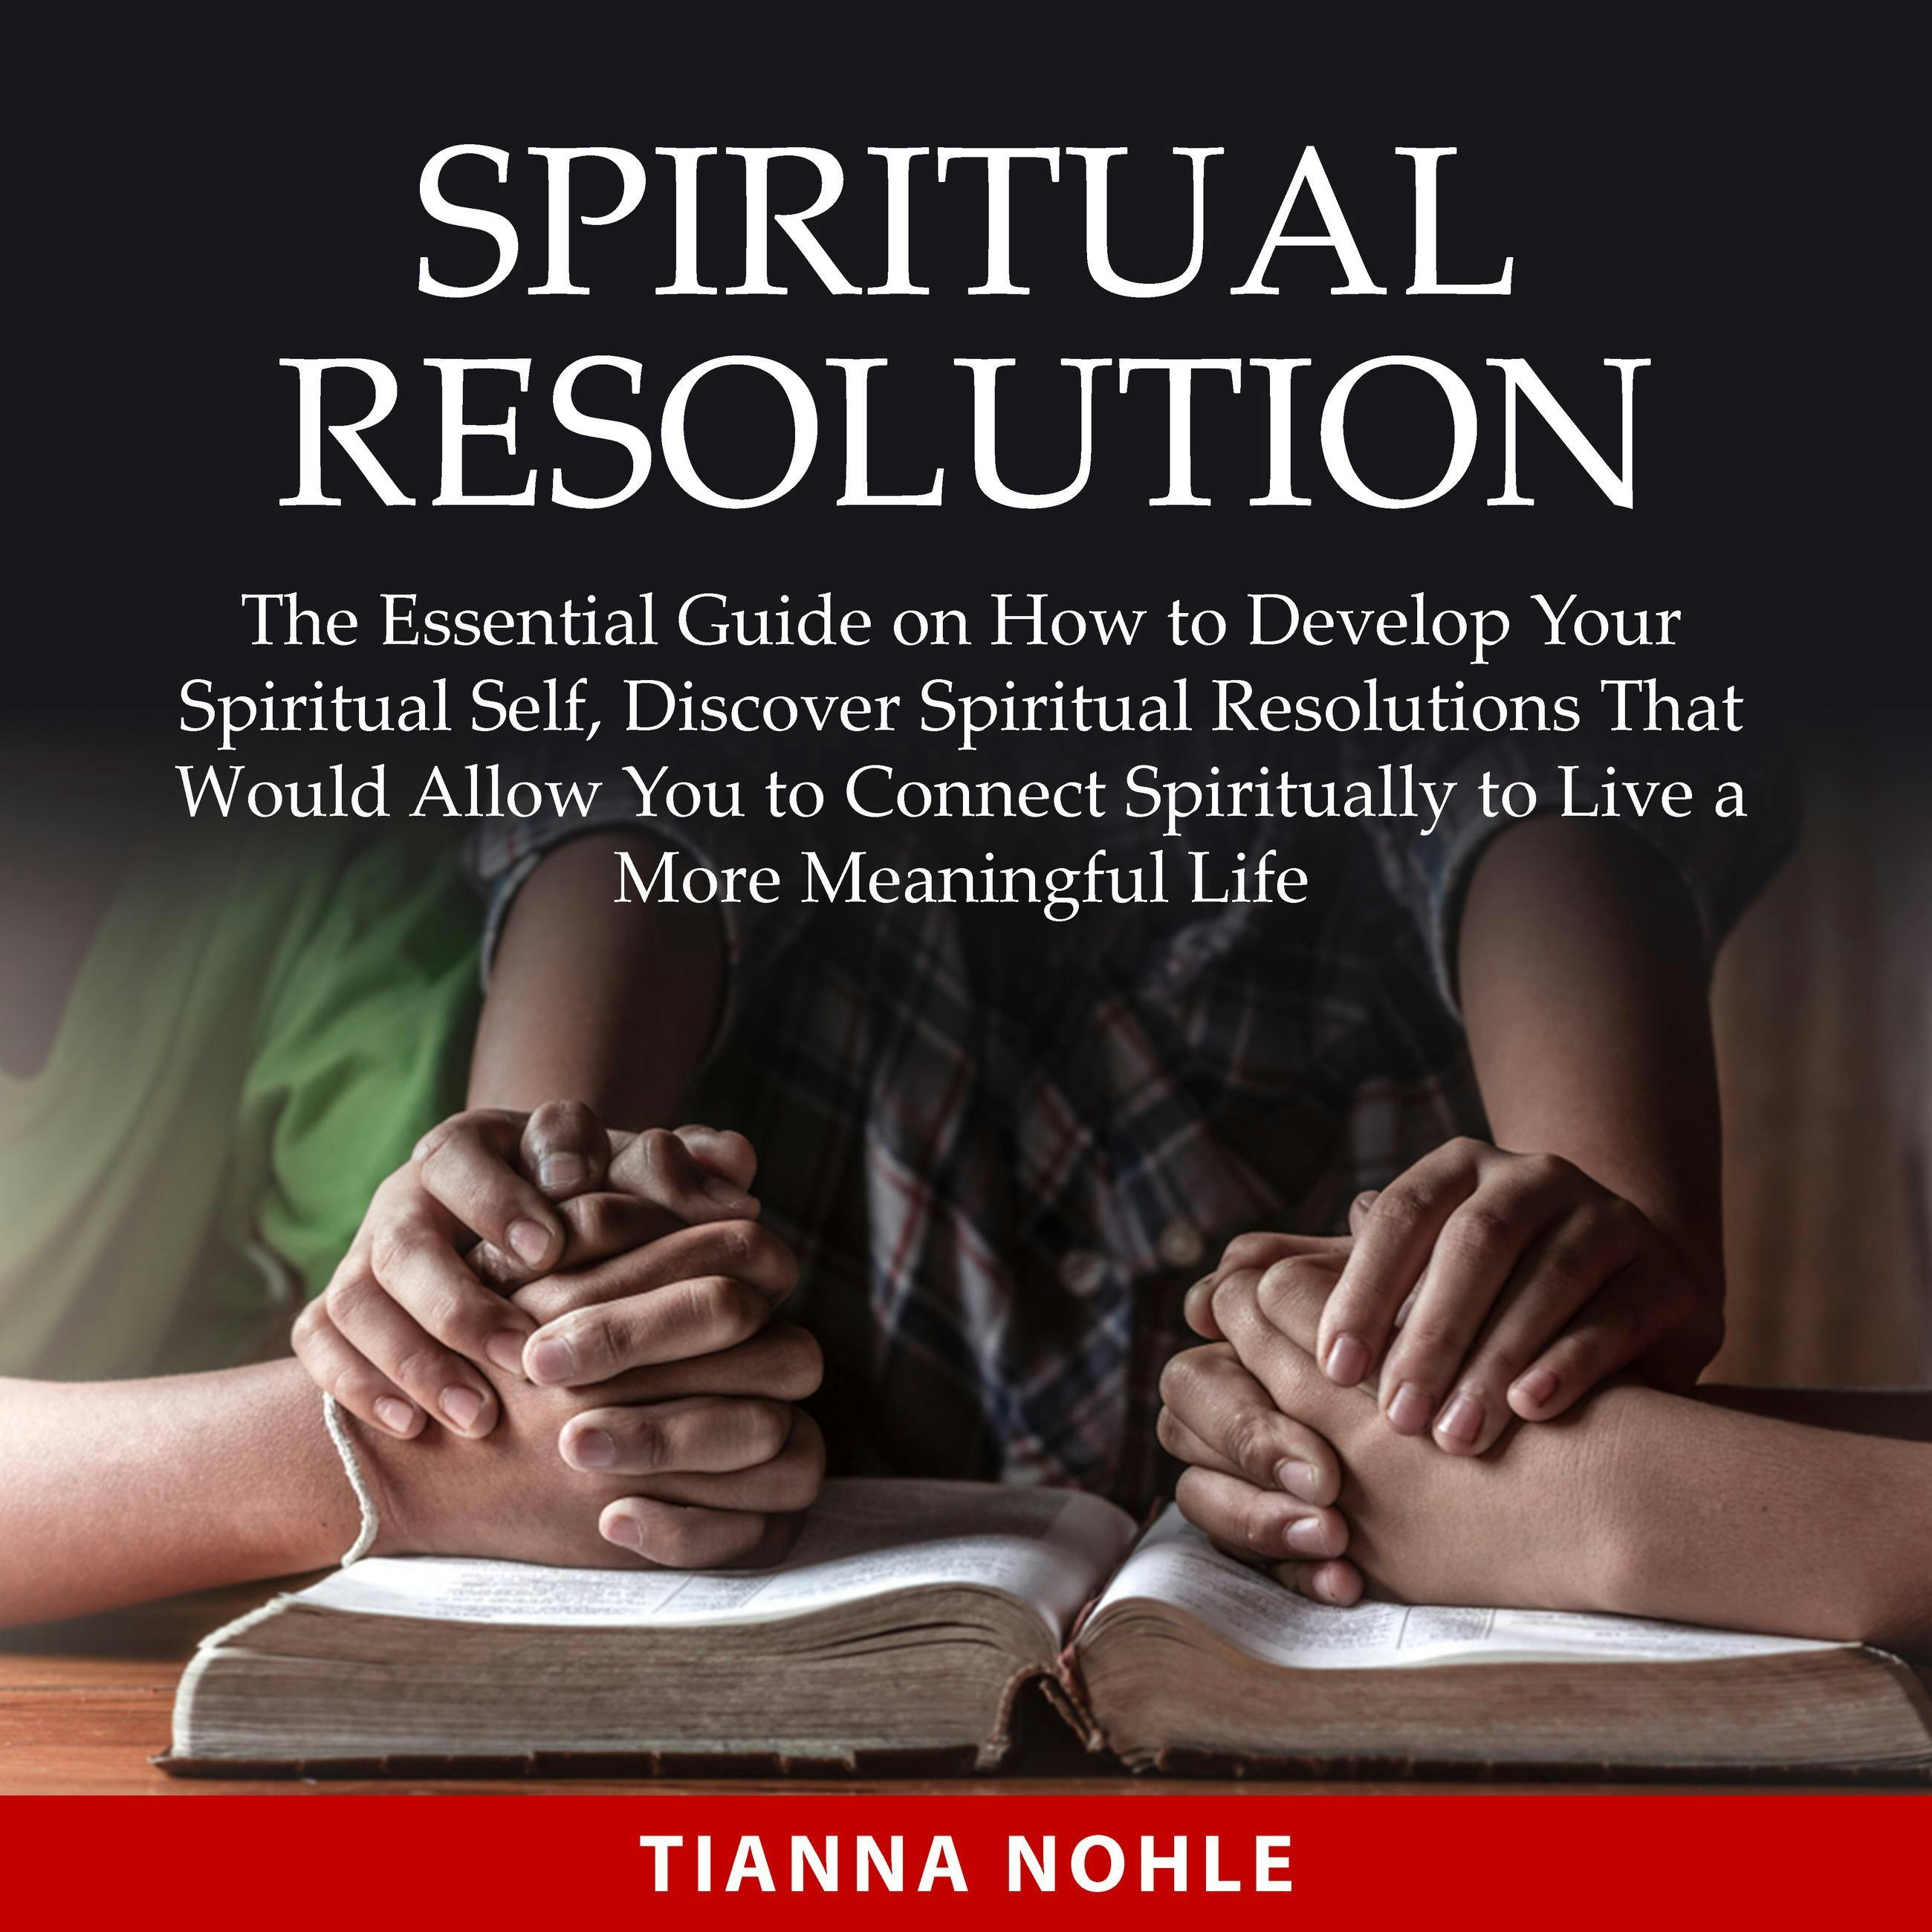 Spiritual Resolution: The Essential Guide on How to Develop Your Spiritual Self, Discover Spiritual Resolutions That Would Allow You to Connect Spiritually to Live a More Meaningful Life - undefined